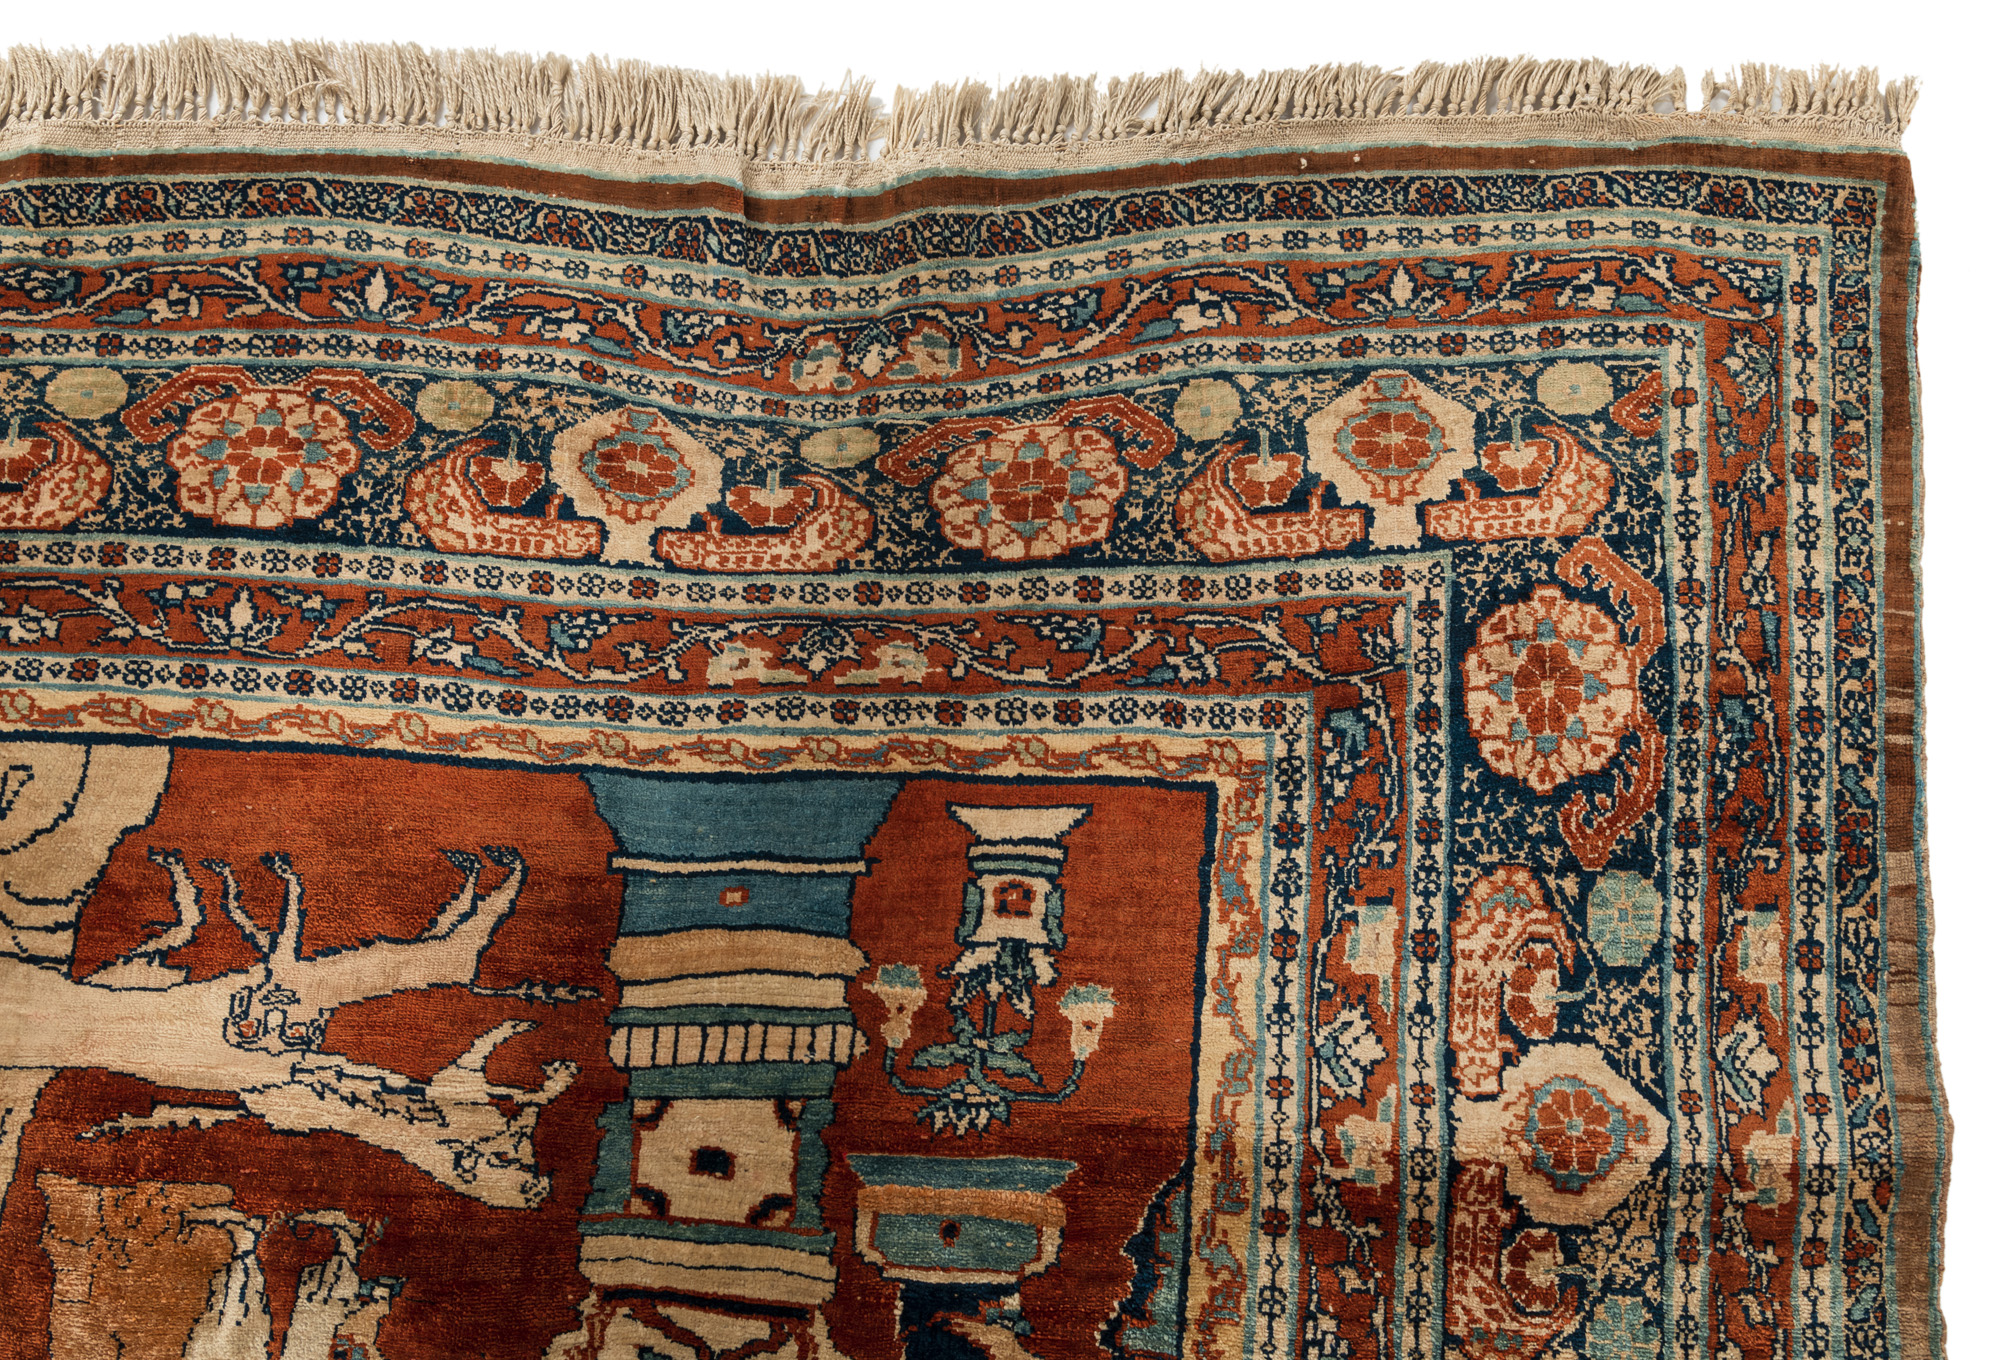 A FINE AND ANTIQUE SILK PRAYER HERIZ RUG WITH FIGURAL SCENE - Image 5 of 6